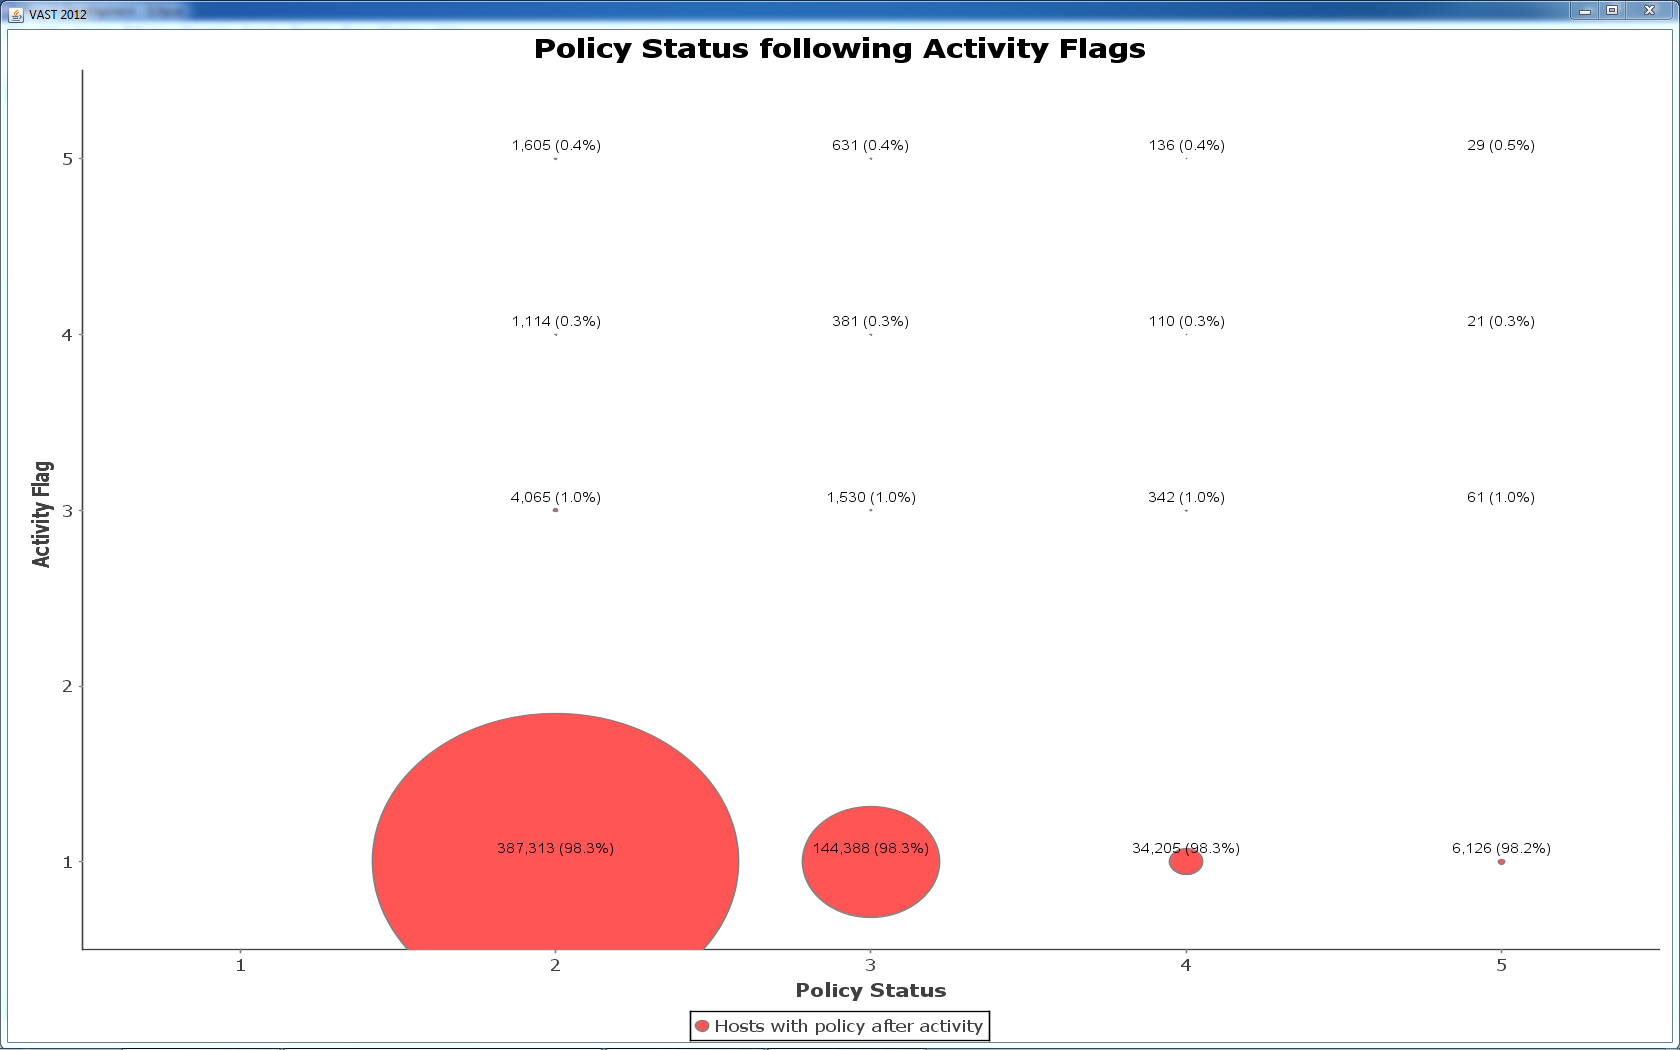 Figure 5 - The activity flags that were reported prior to increasing to a given policy status